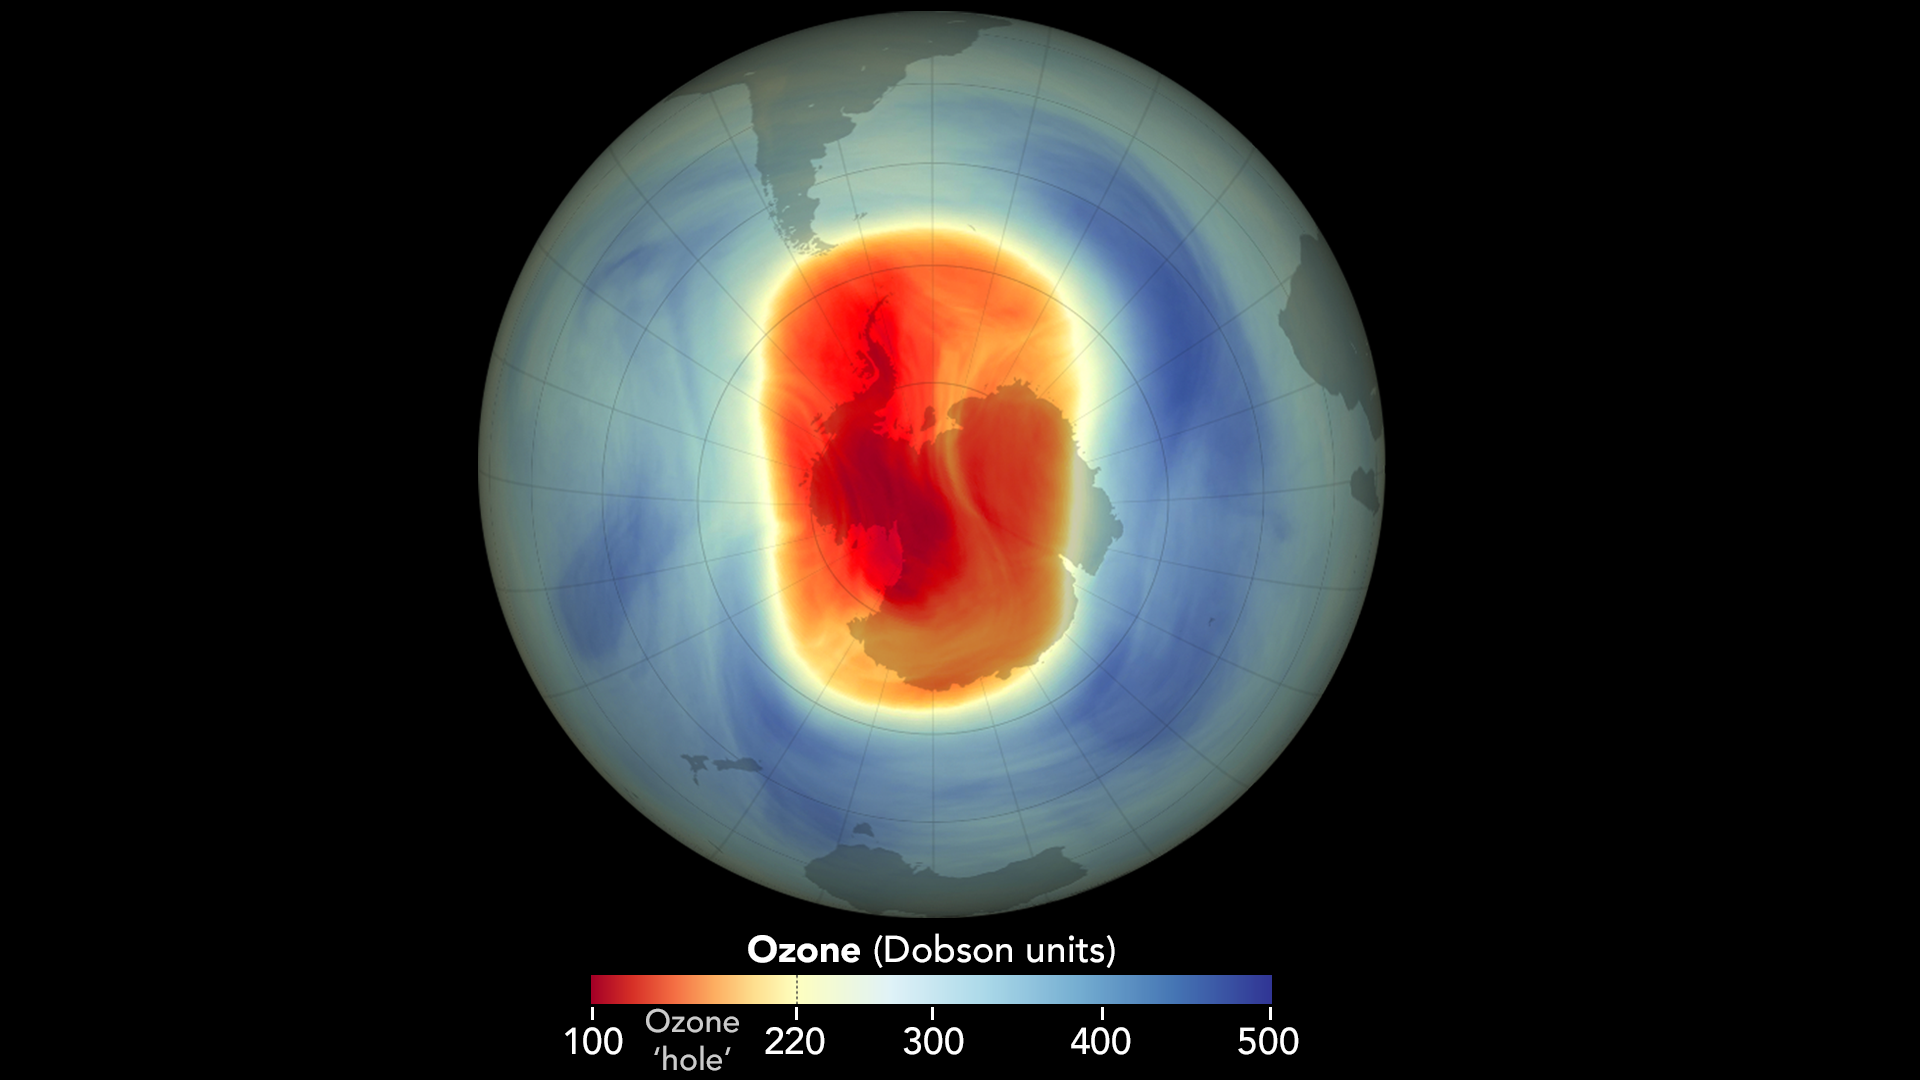 Researchers found that the depleted area of the ozone layer over the South Pole was slightly improved this year.